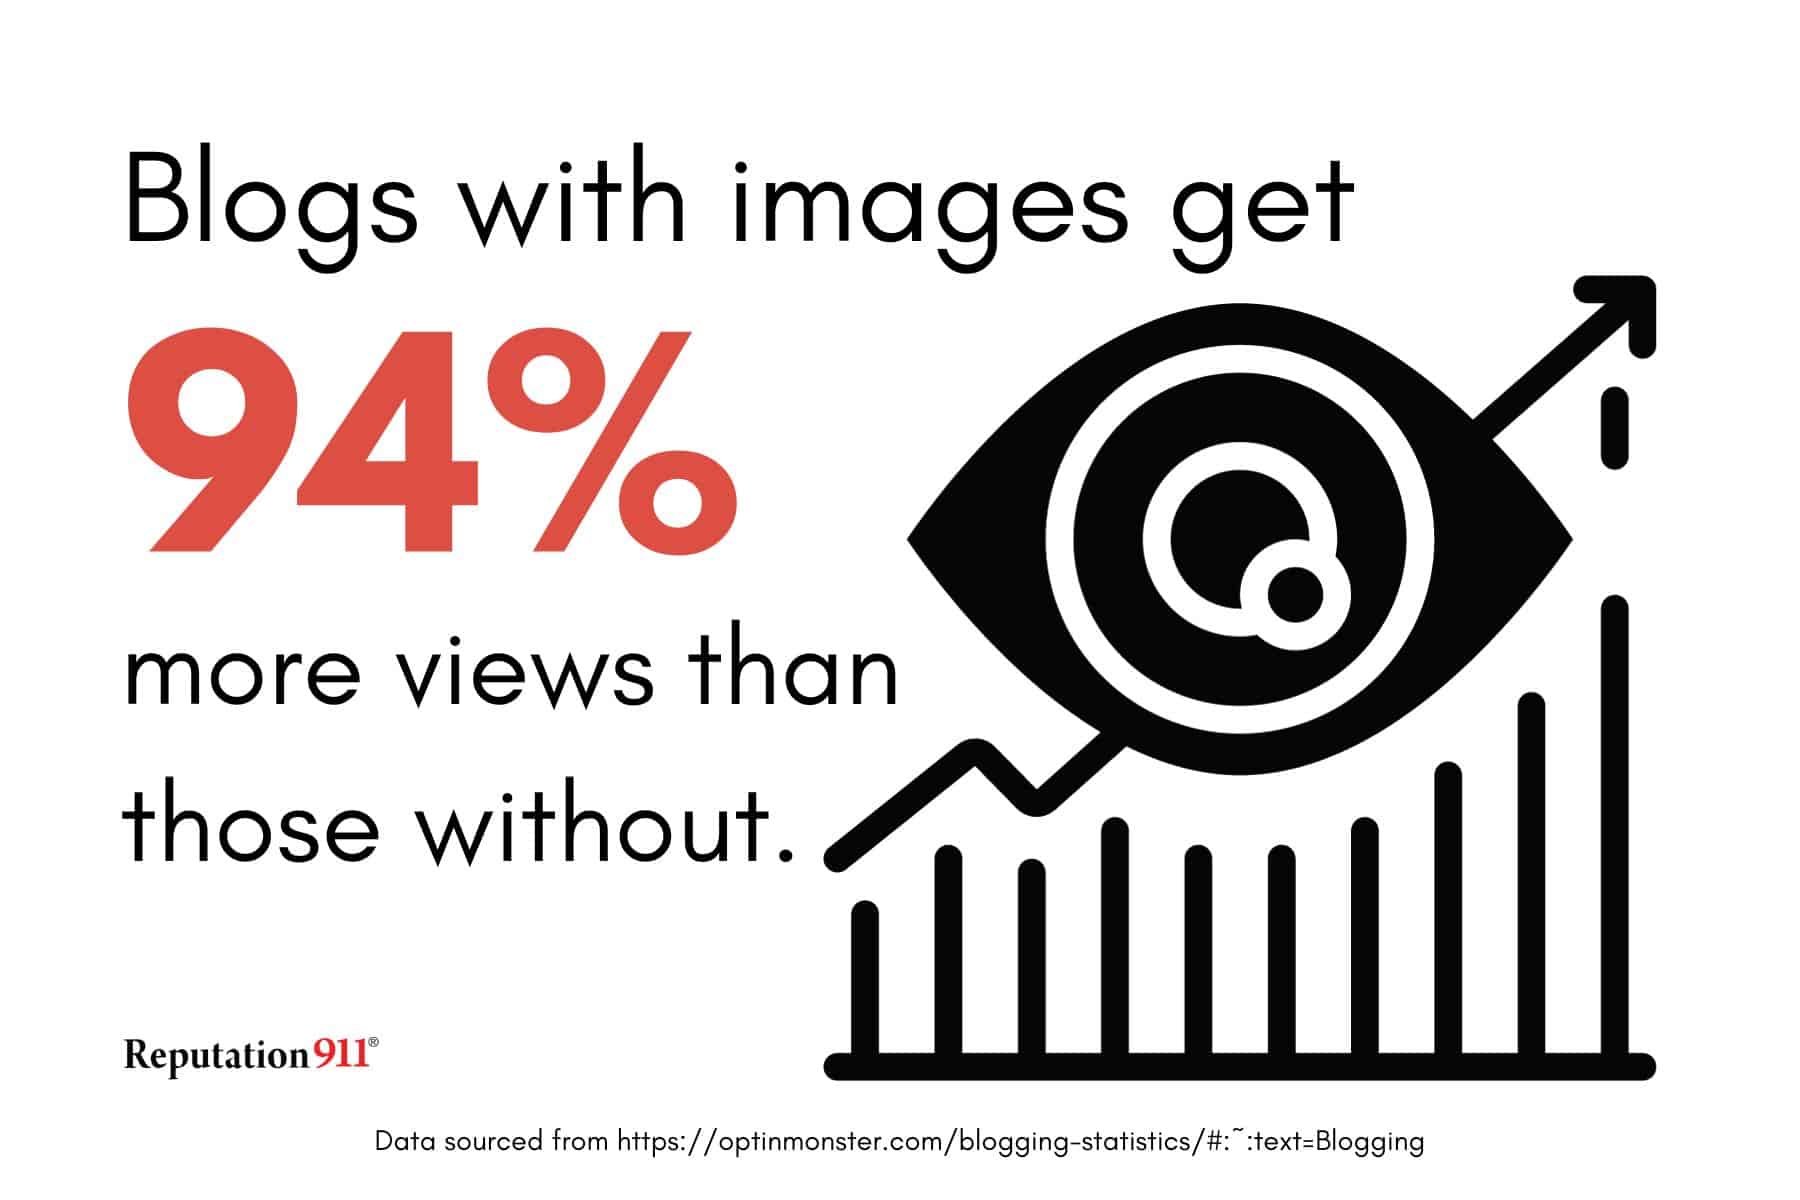 blog posts with images get 94% more views